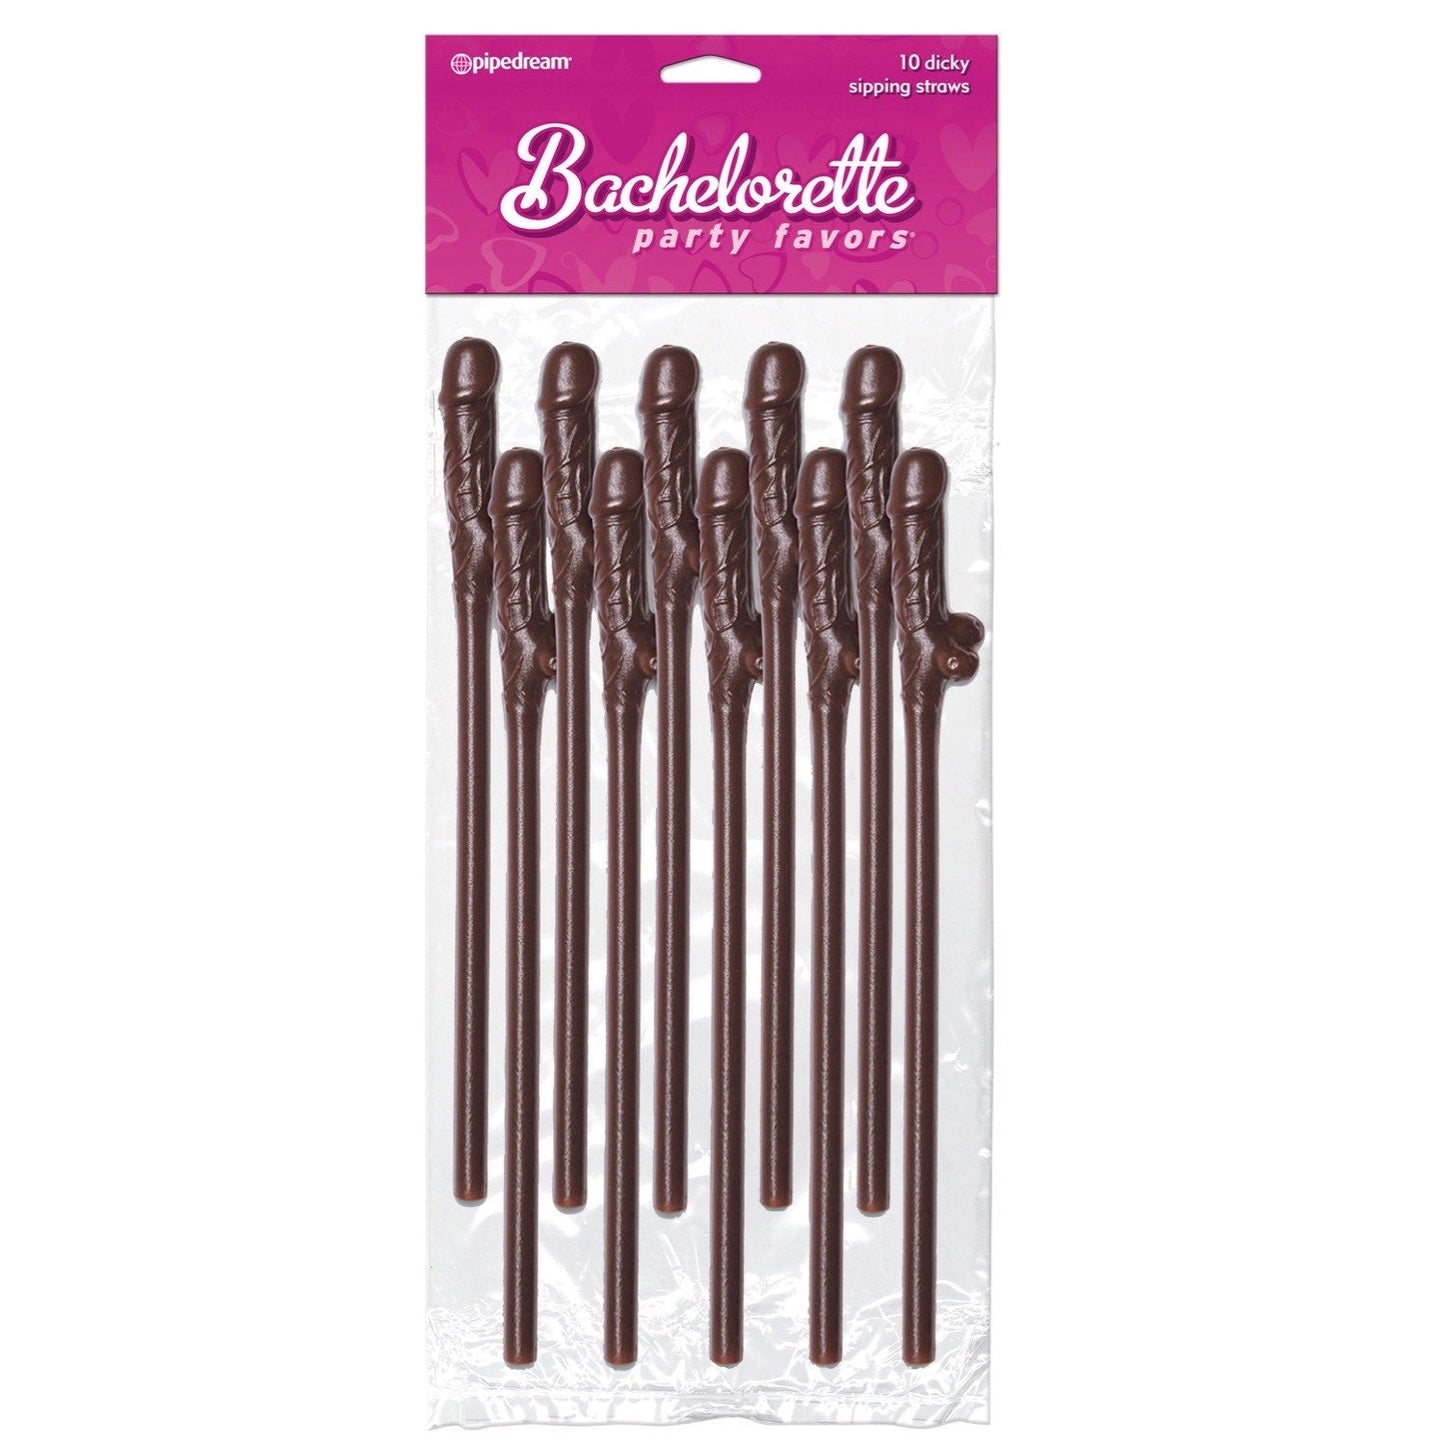 Dicky Sipping Straws - Chocolate Coloured Straws - Set of 10